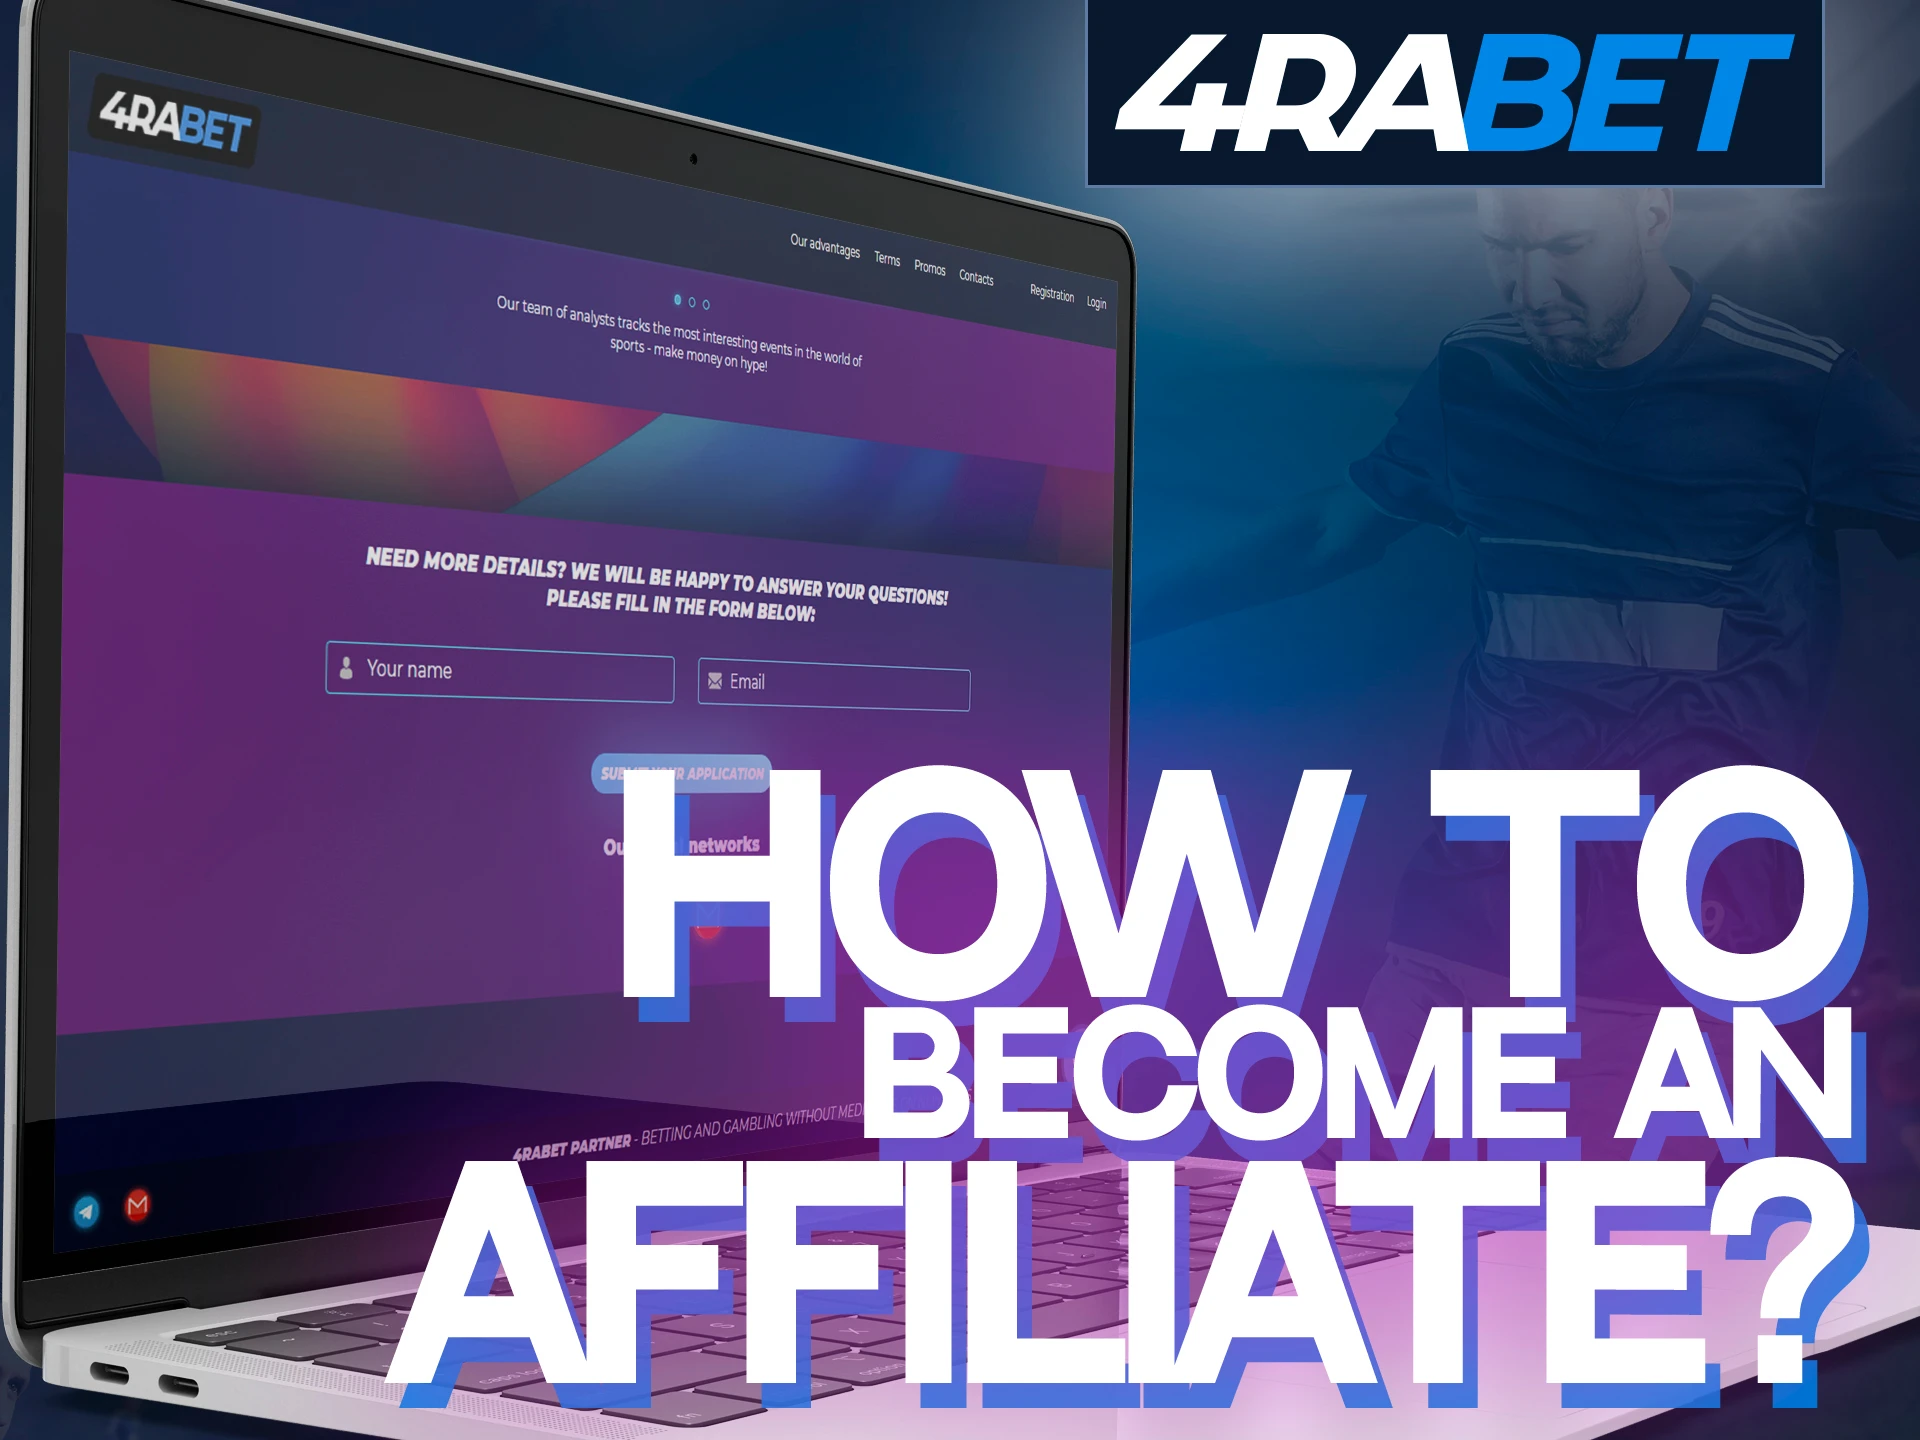 It's easy to become 4rabet affiliate program member.